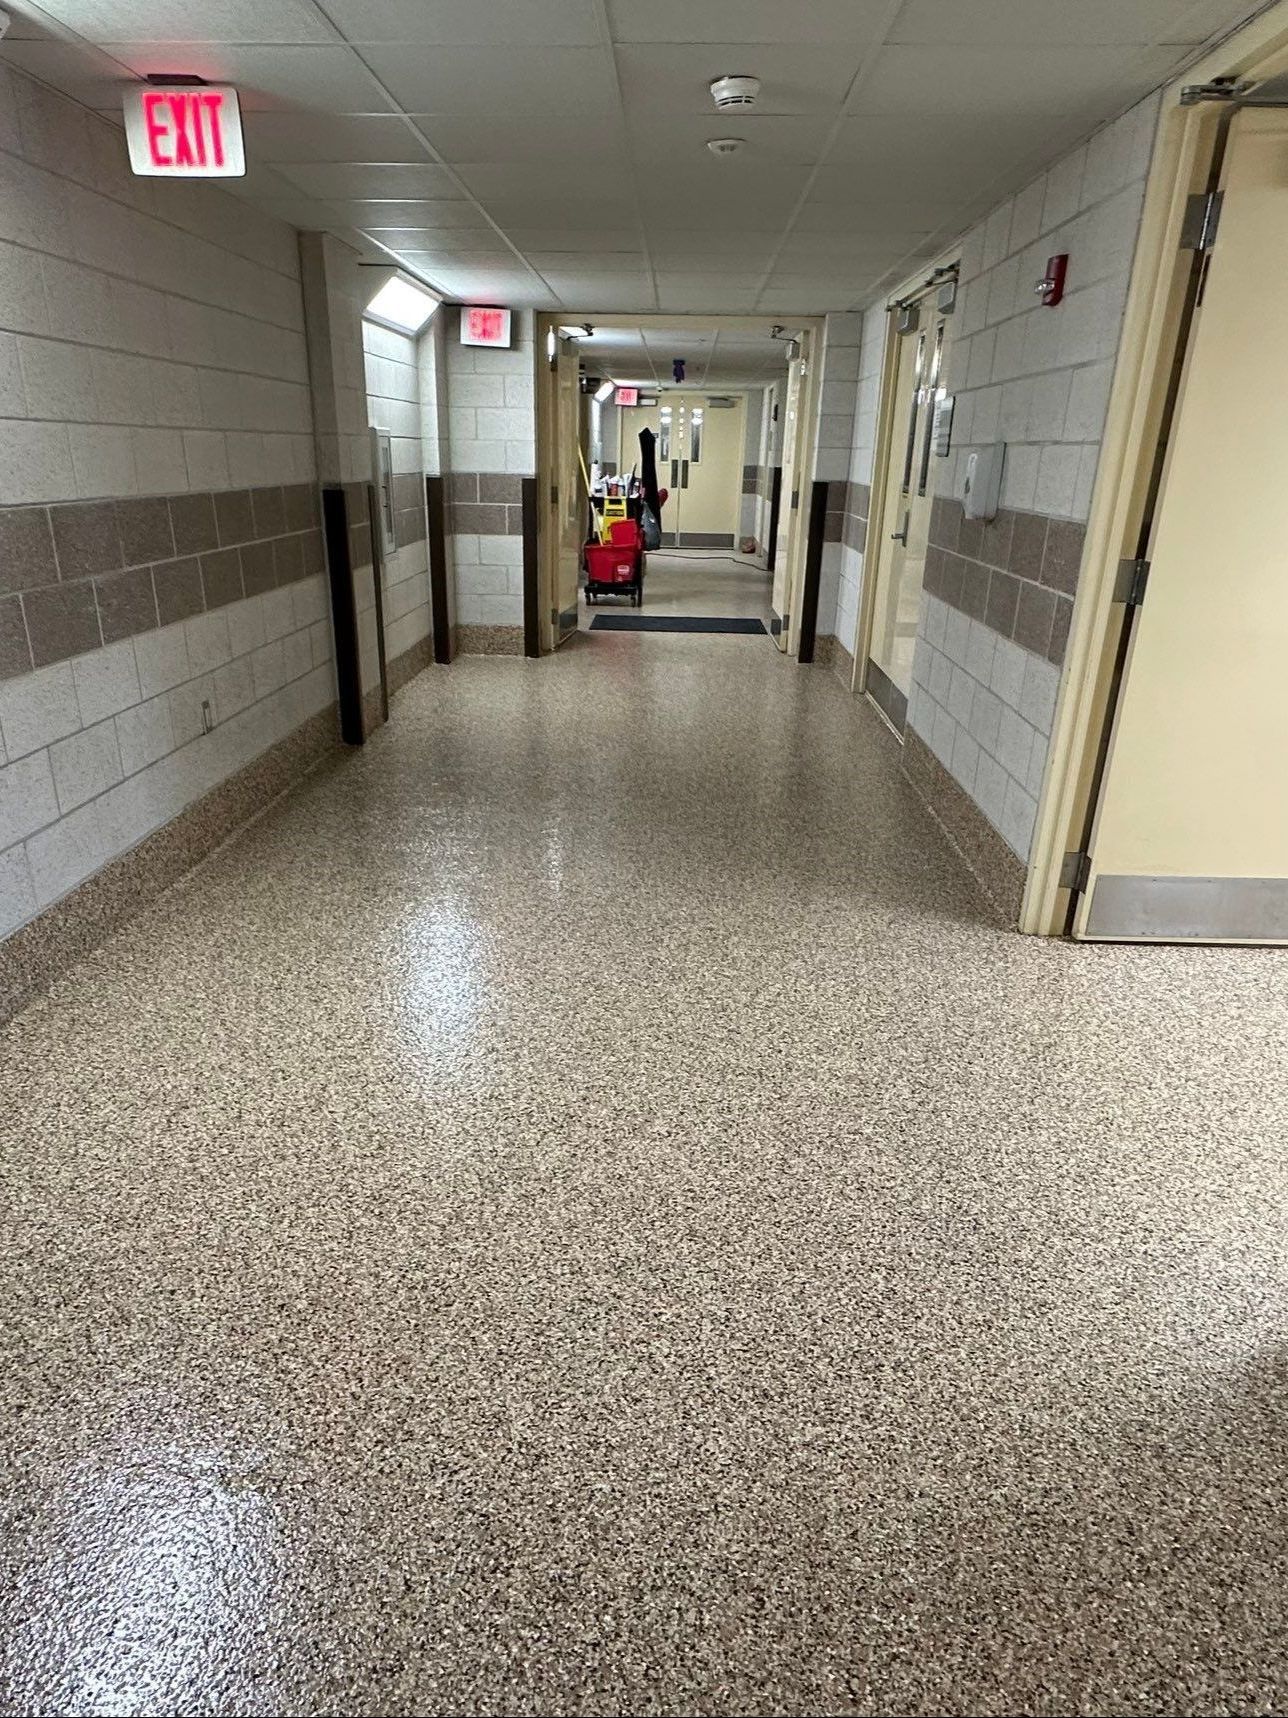 Room in medical facility with new concrete coating on floor